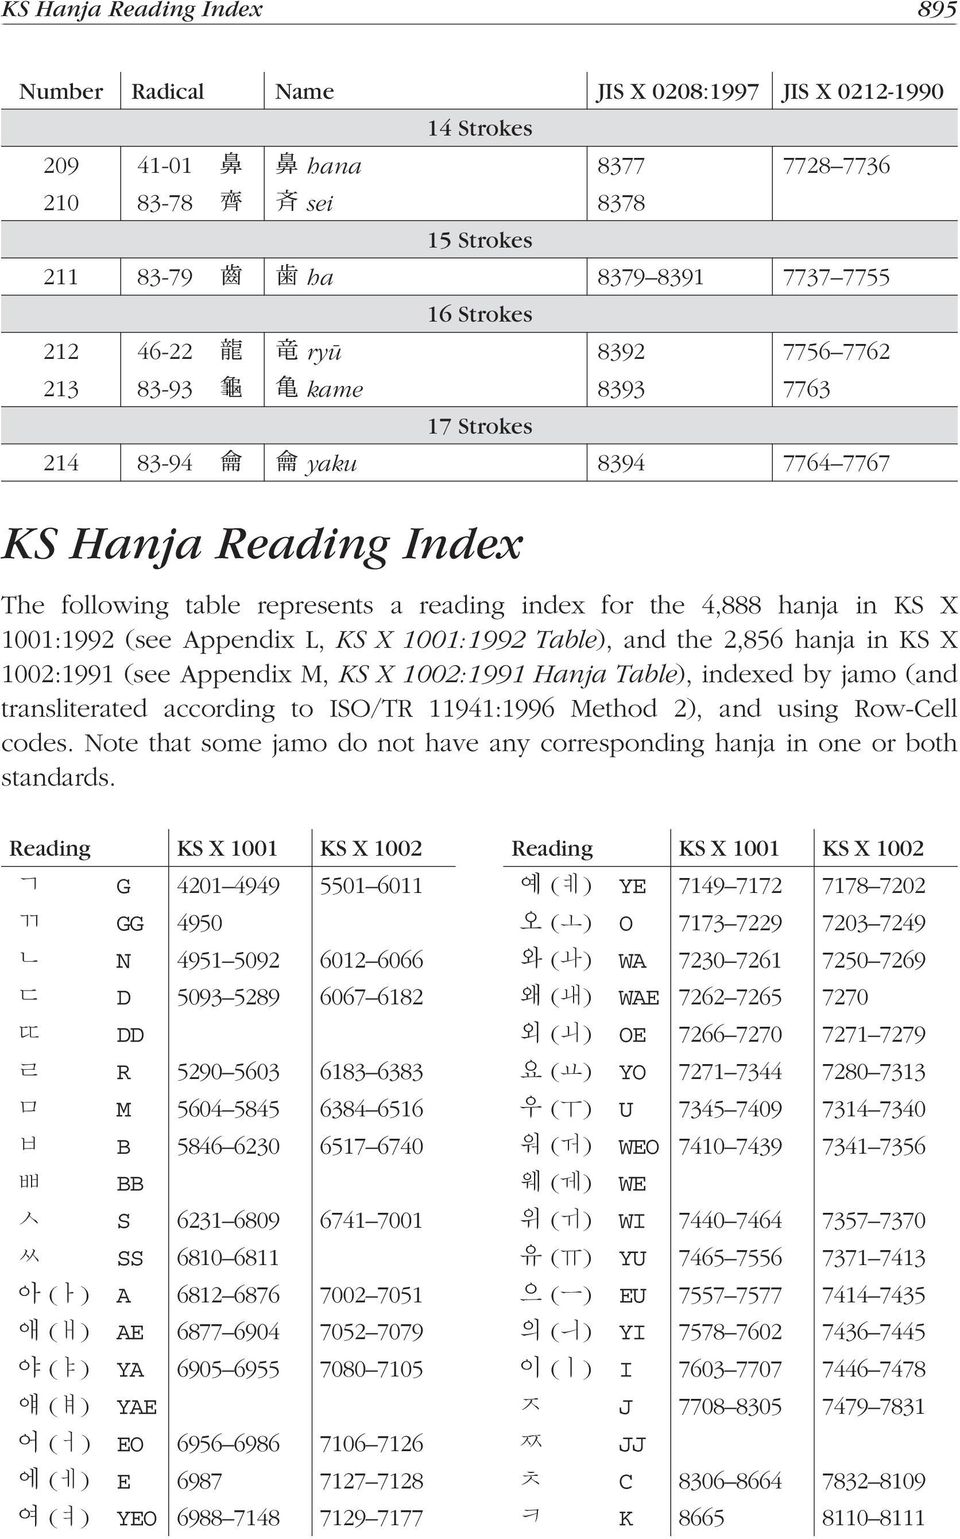 in KS X 11:1992 (see Appendix L, KS X 11:1992 Table), and the 2,856 hanja in KS X 12:1991 (see Appendix M, KS X 12:1991 Hanja Table), indexed by jamo (and transliterated according to ISO/TR